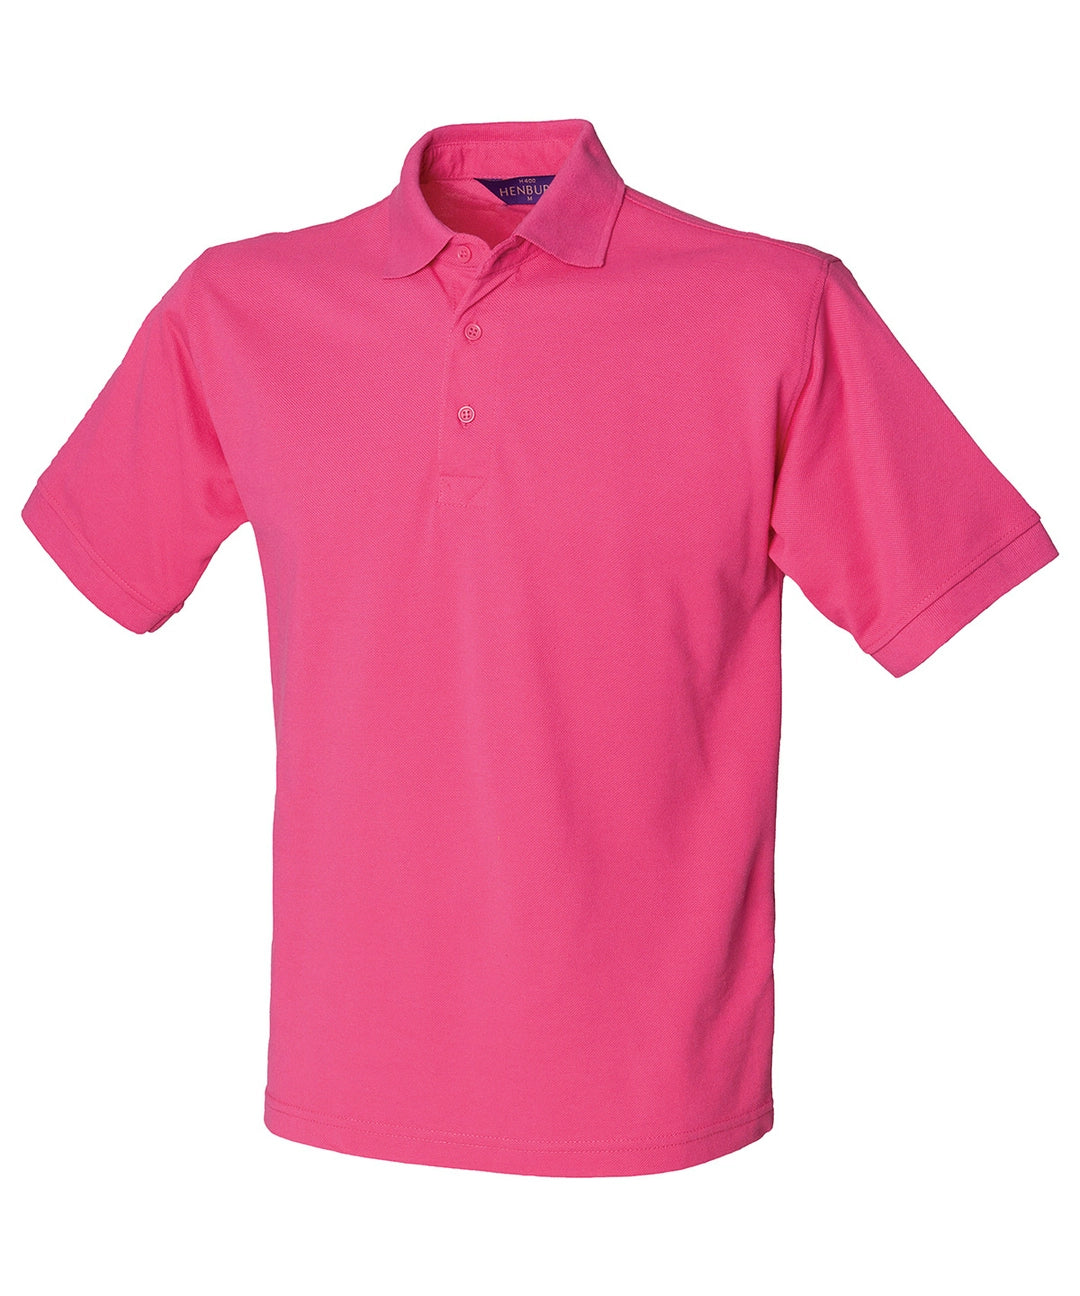 Henbury Heavy HB400 Poly/Cotton  Piqué  Polo Shirt Stand up collar Taped neck Other color - COOZO